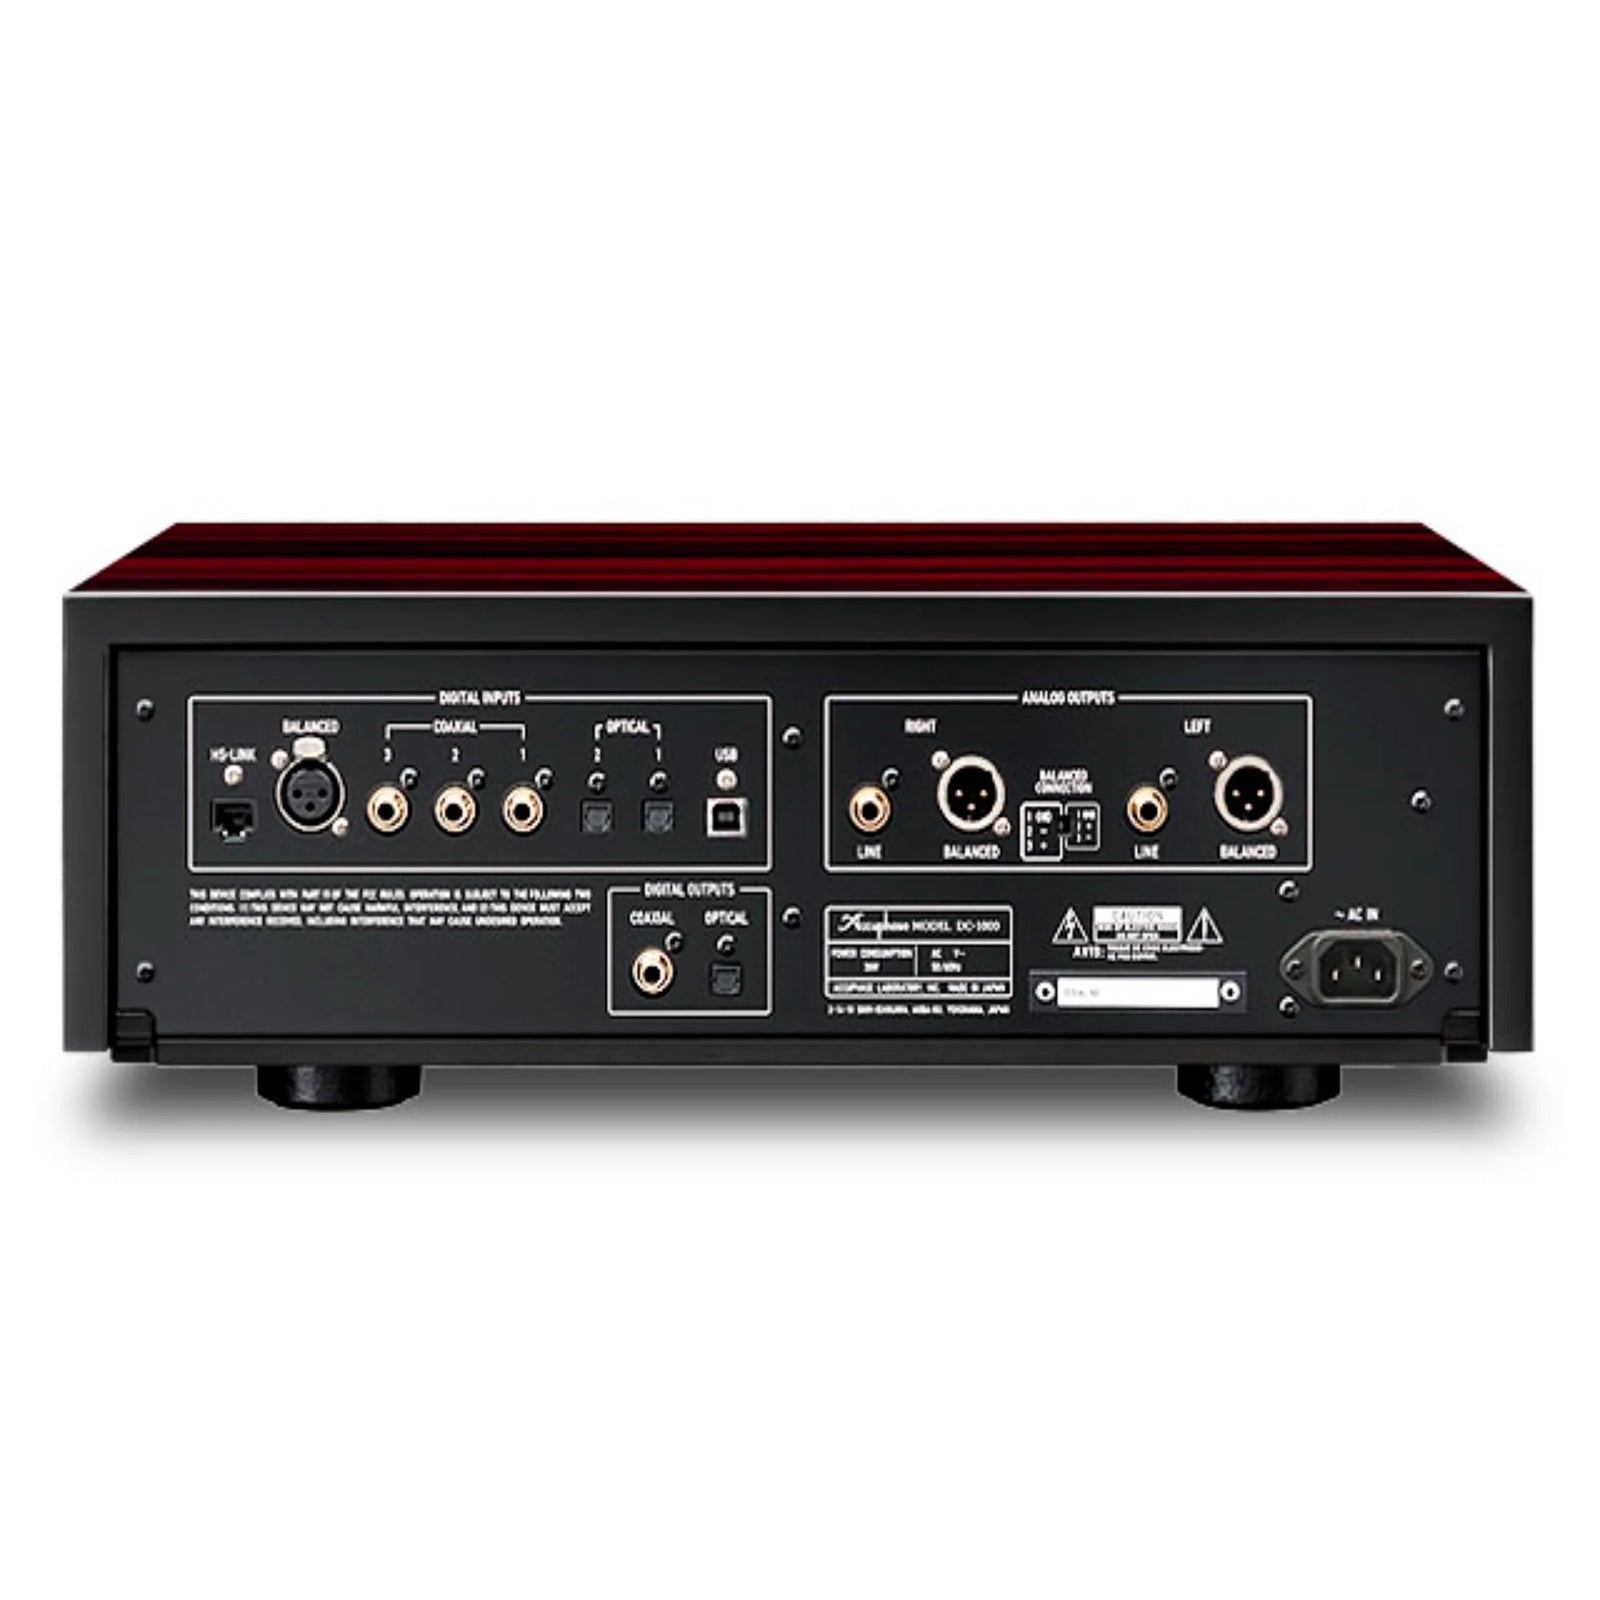 Accuphase DC-1000 Precision Digital Analog Converter Product & Specification Accuphase celebrates 50 years of manufacturing with the DC-1000, a digital processor developed to deliver the ultimate in performance and sound quality.